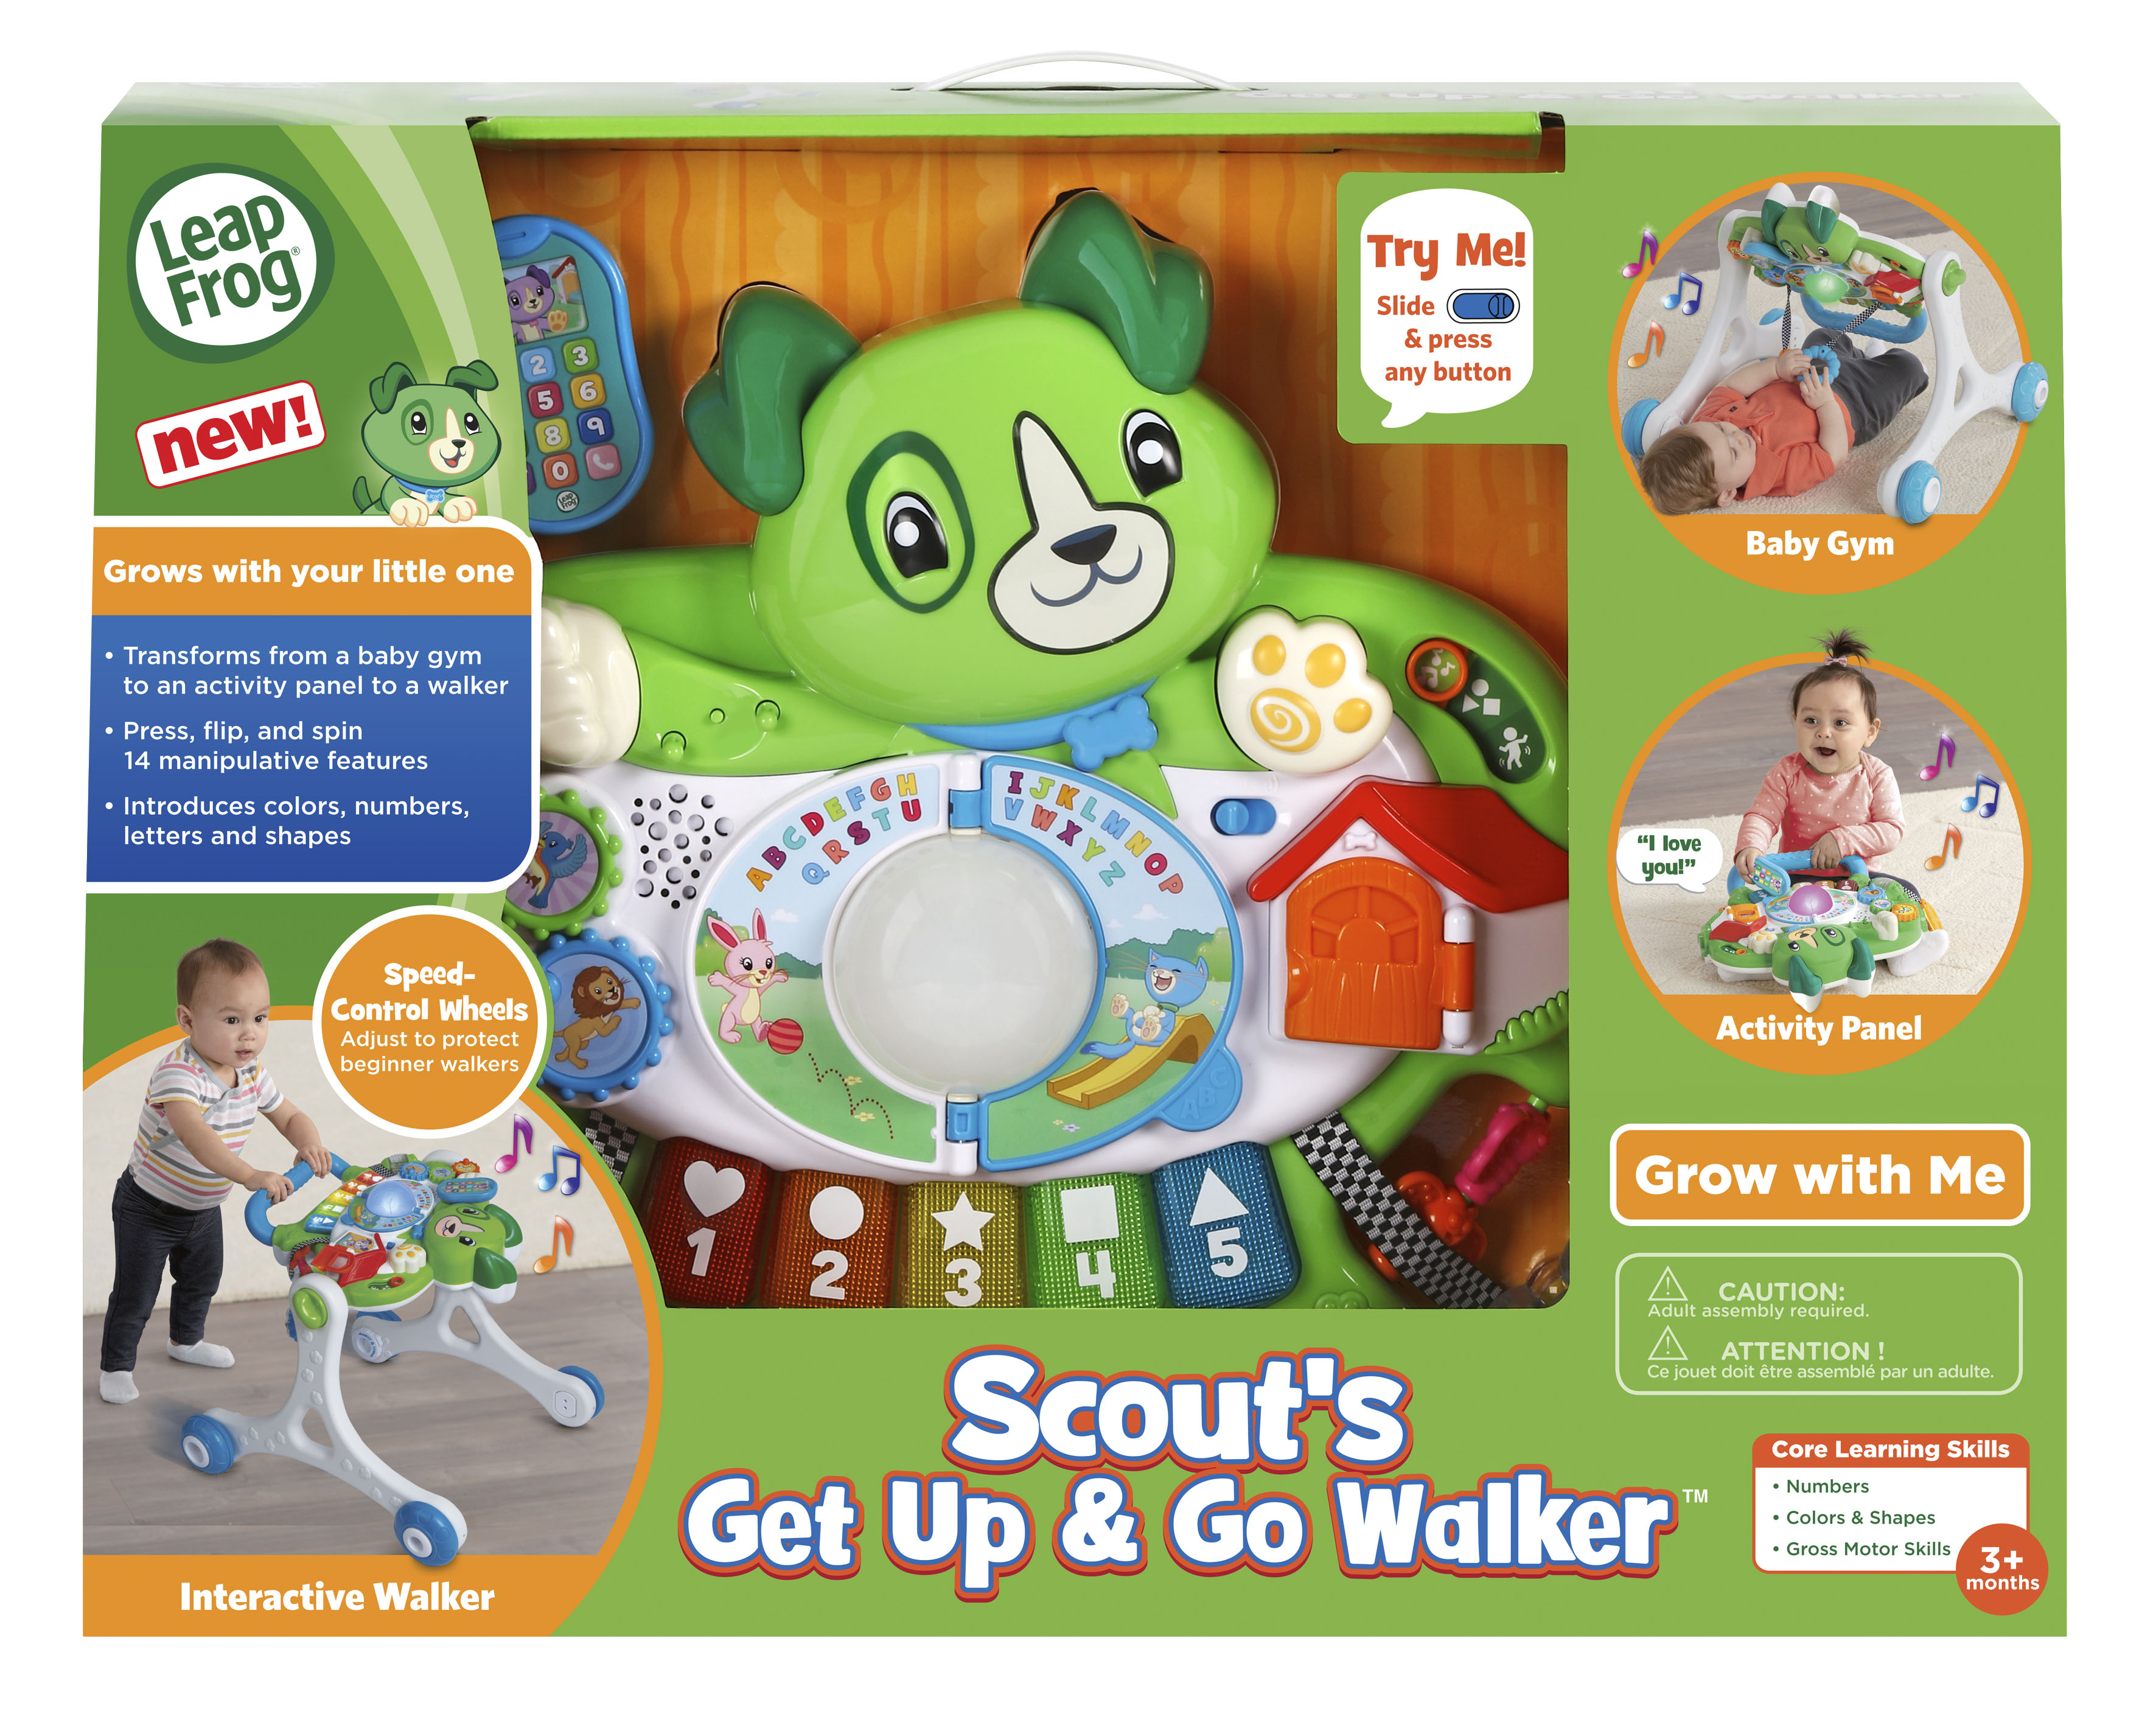 Scout's 3-in-1 Get Up and Go Walker, Baby Gym, Floor Play Toy, Green - image 7 of 11